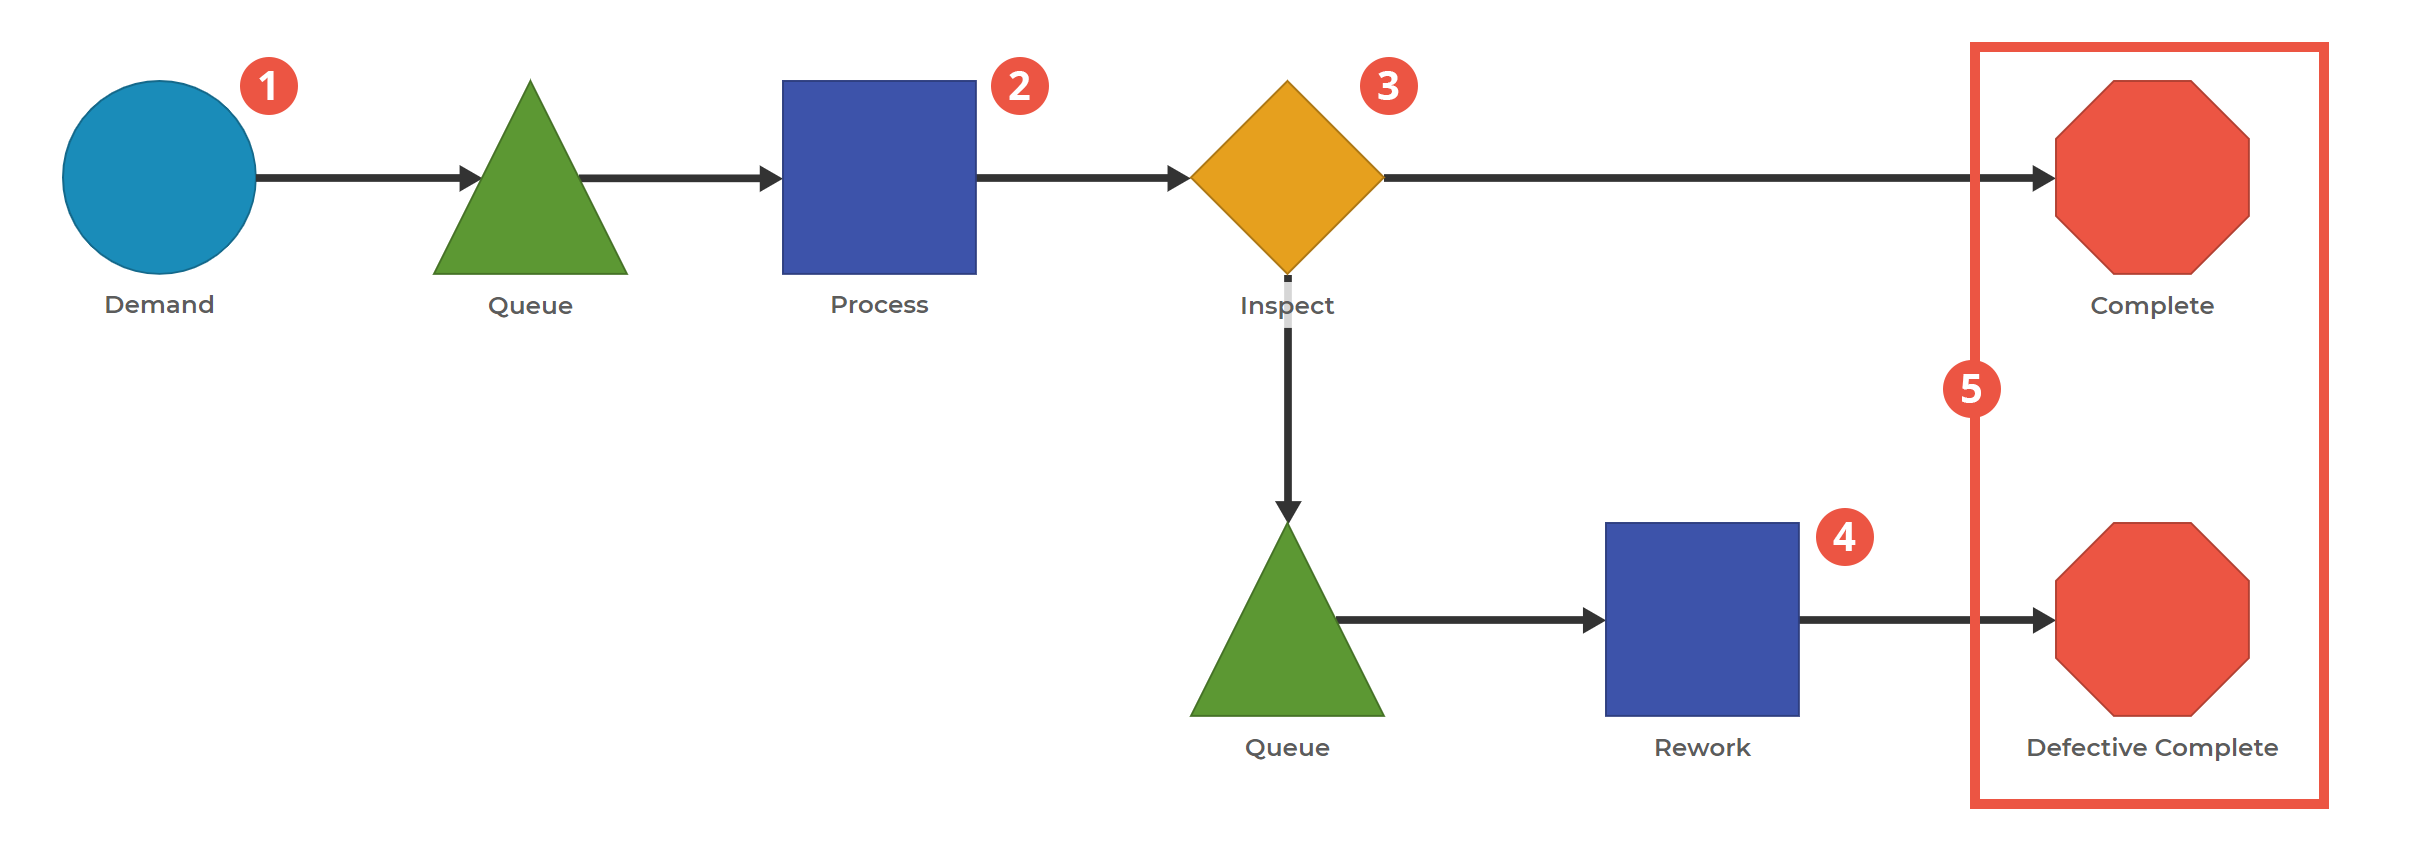 Process Playground model highlighting one way to account for defects in your process